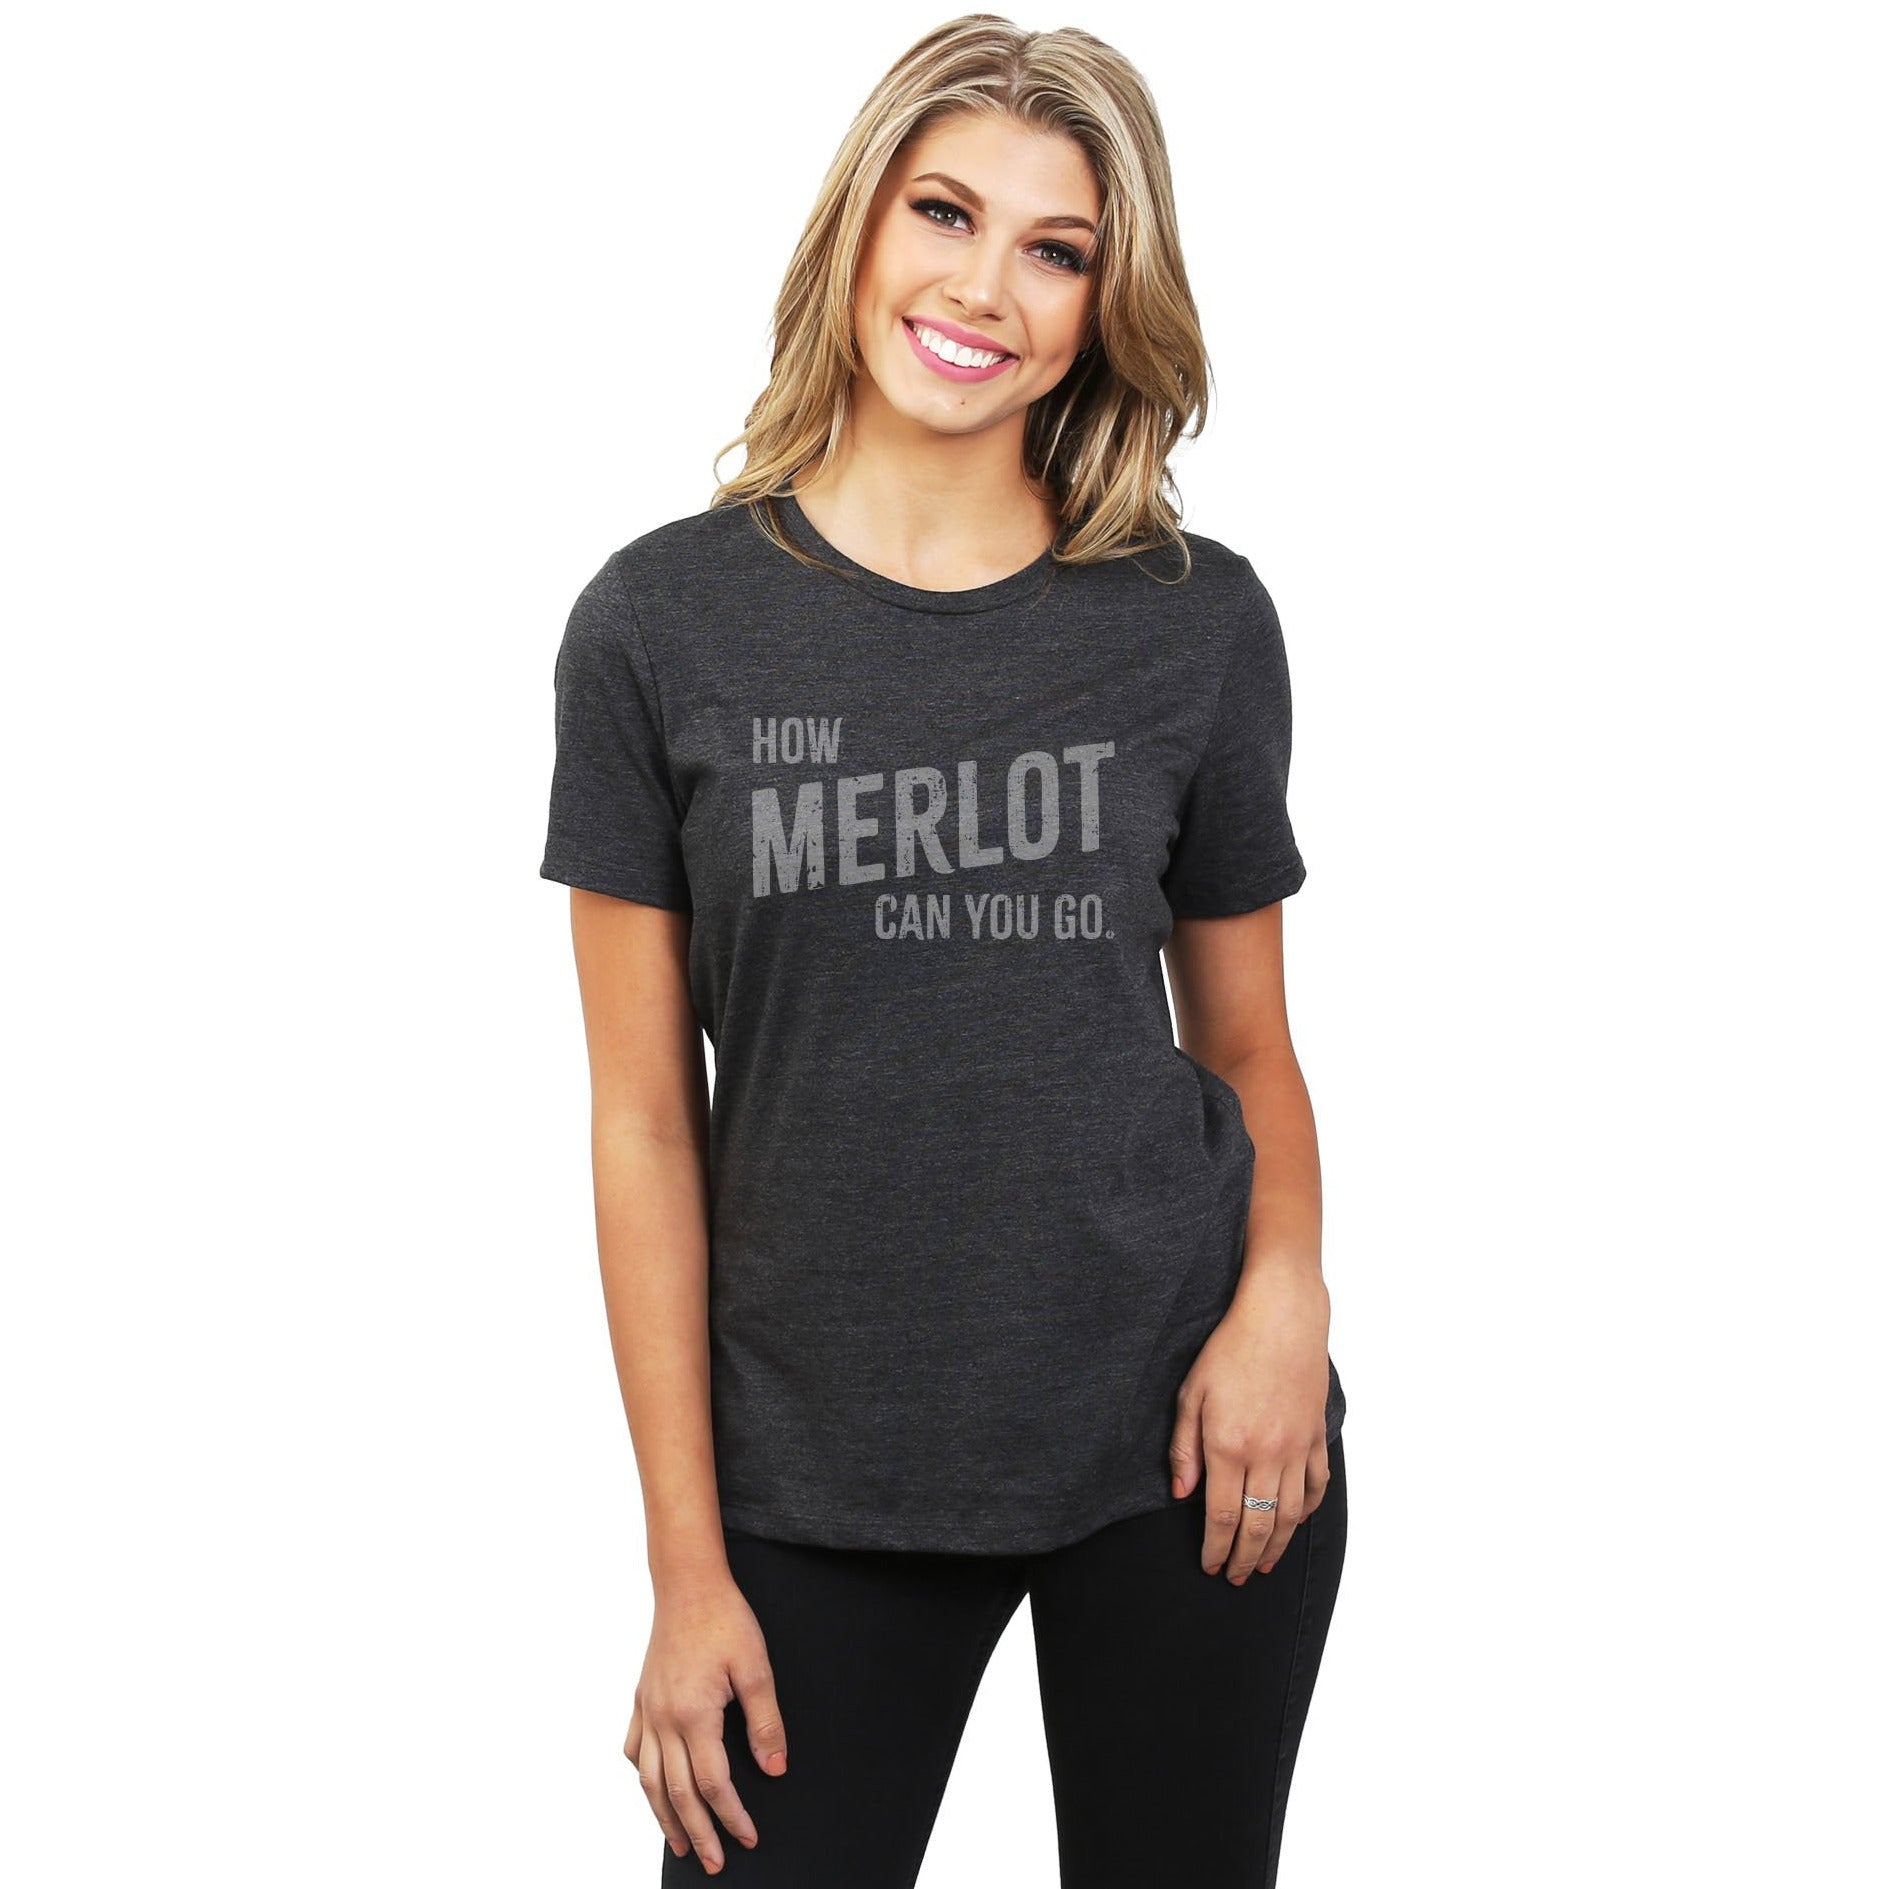 How Merlot Can You Go Women's Relaxed Crewneck T-Shirt Top Tee Charocal Model